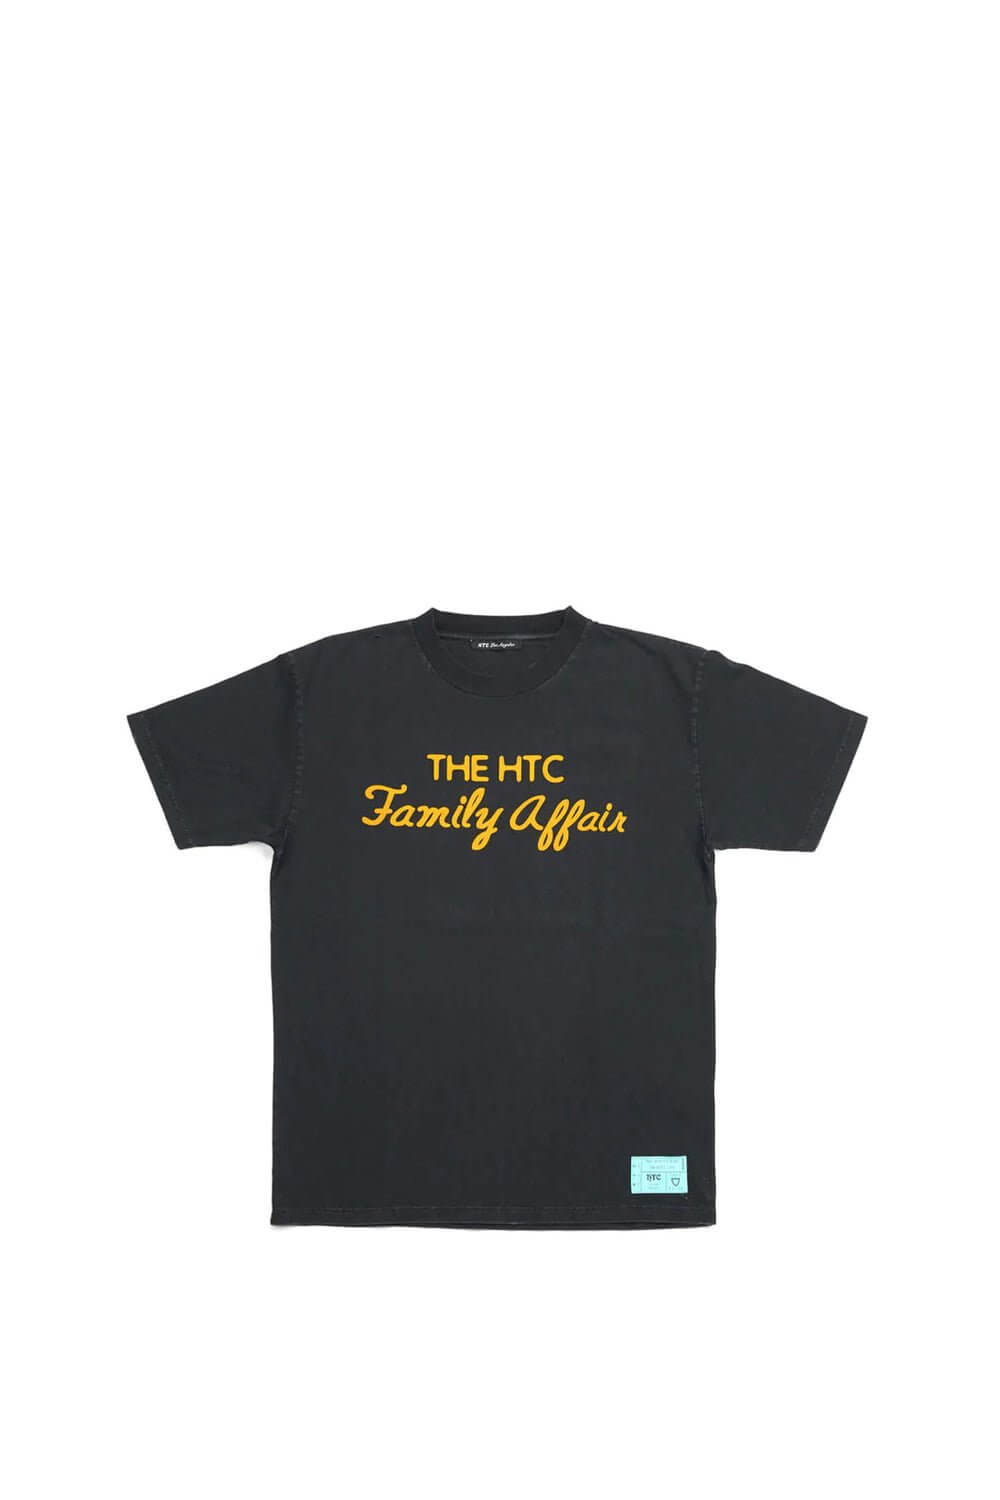 HTC FAMILY T-SHIRT Front print t-shirt. HTC print on the back. 100% cotton. Made in Italy. HTC LOS ANGELES